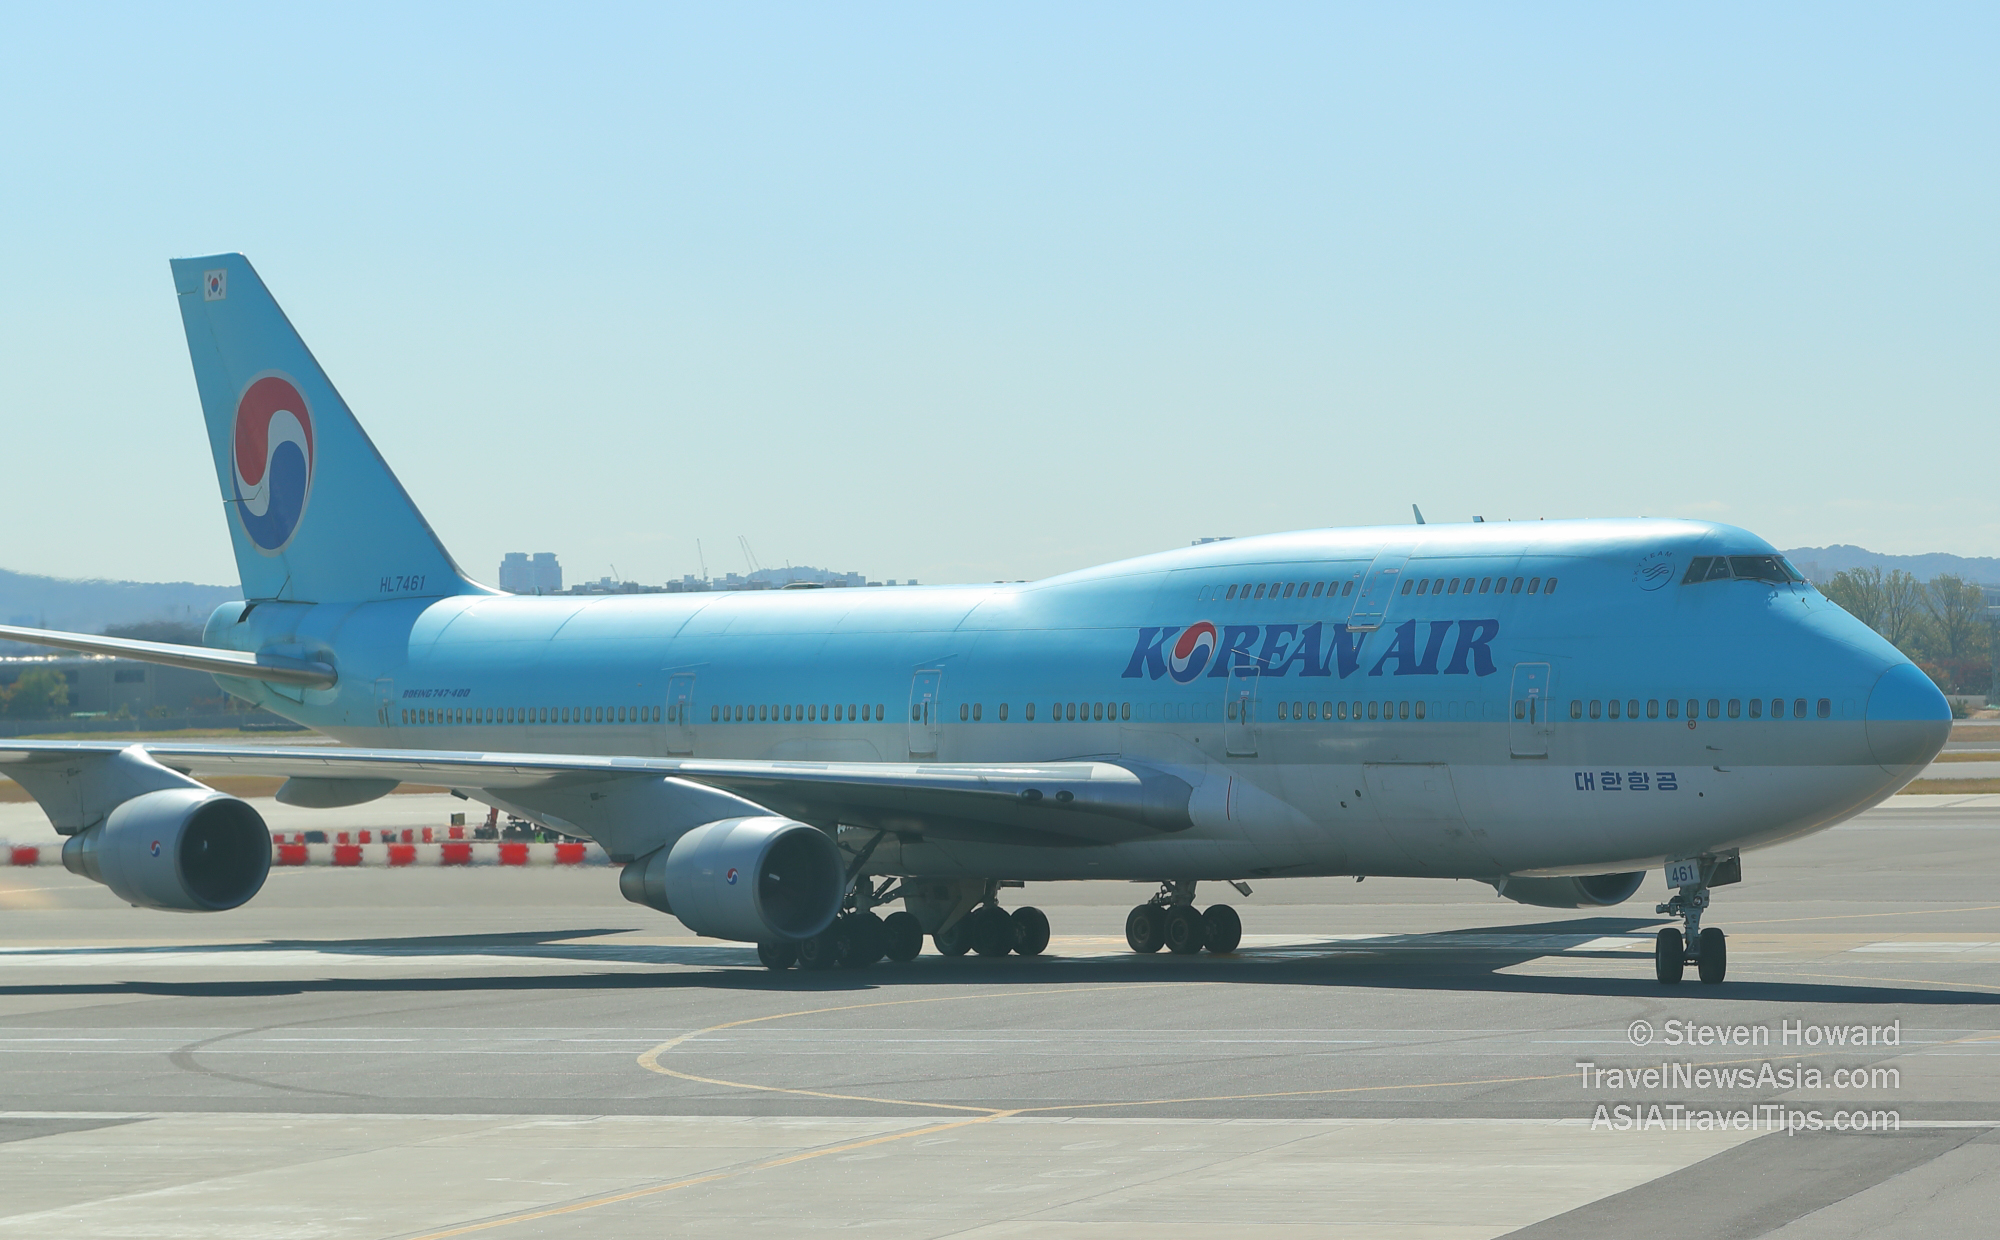 Korean Air Boeing 747-400 at Gimpo Airport in Seoul, South Korea. Picture by Steven Howard of TravelNewsAsia.com Click to enlarge.